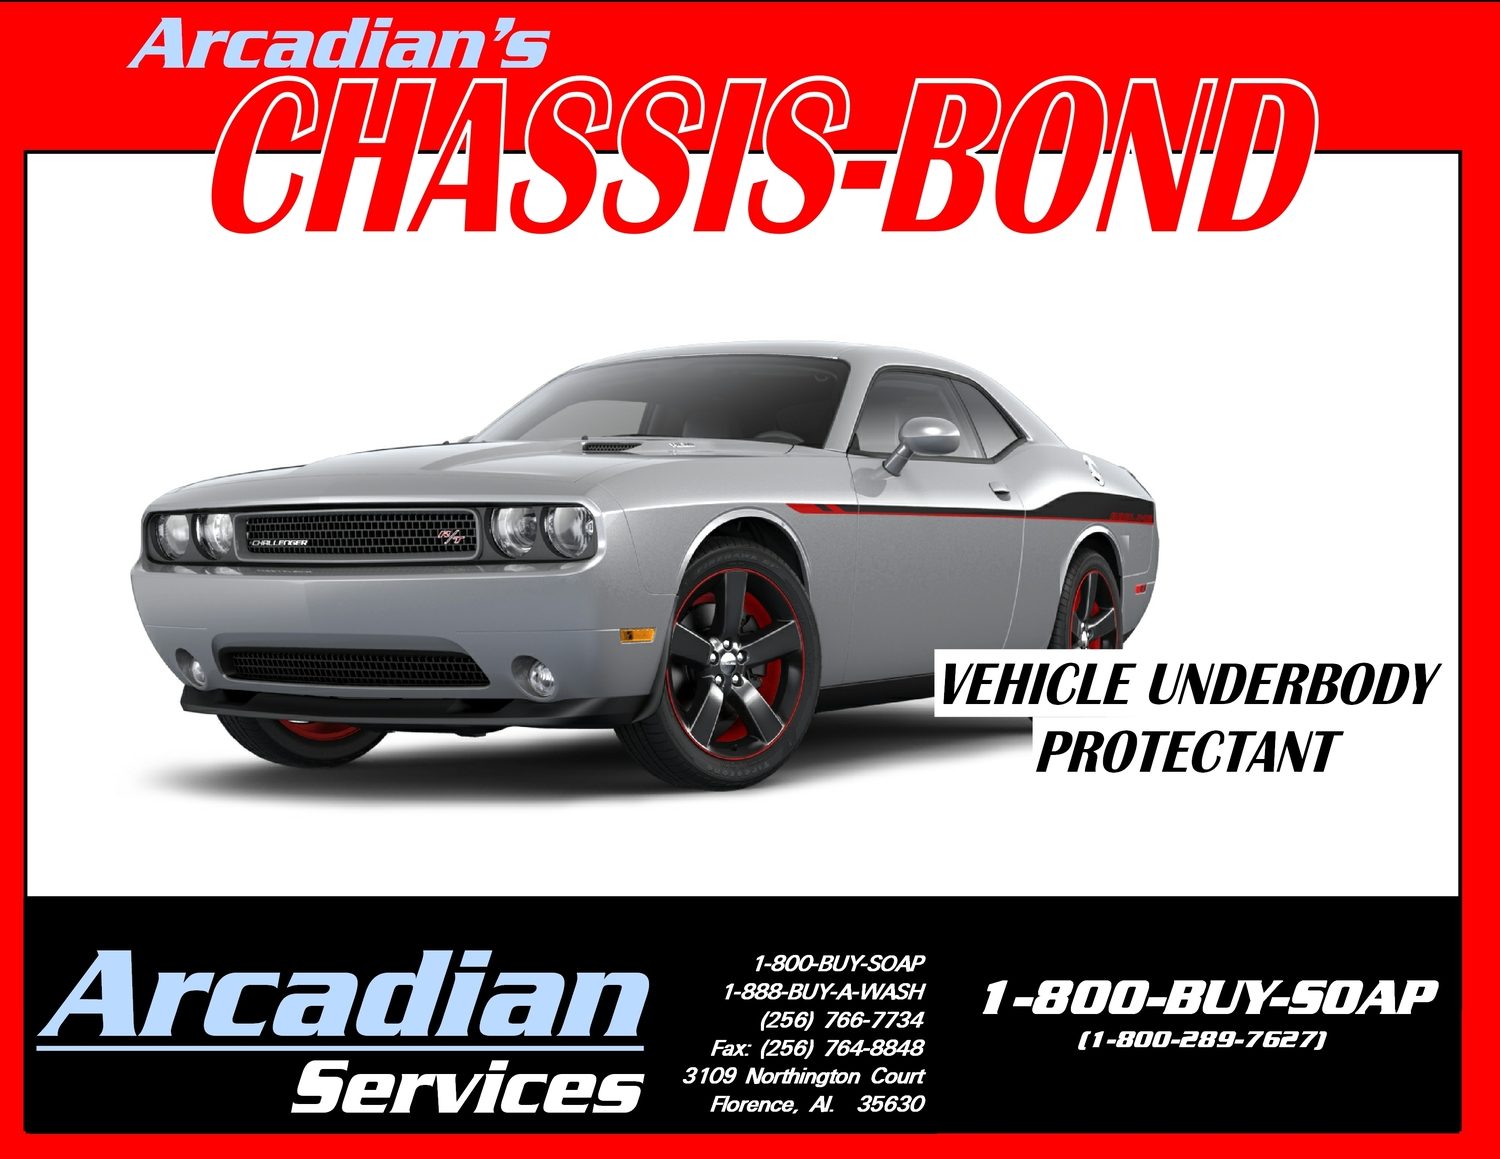 Chassis-Bond - Arcadian Services